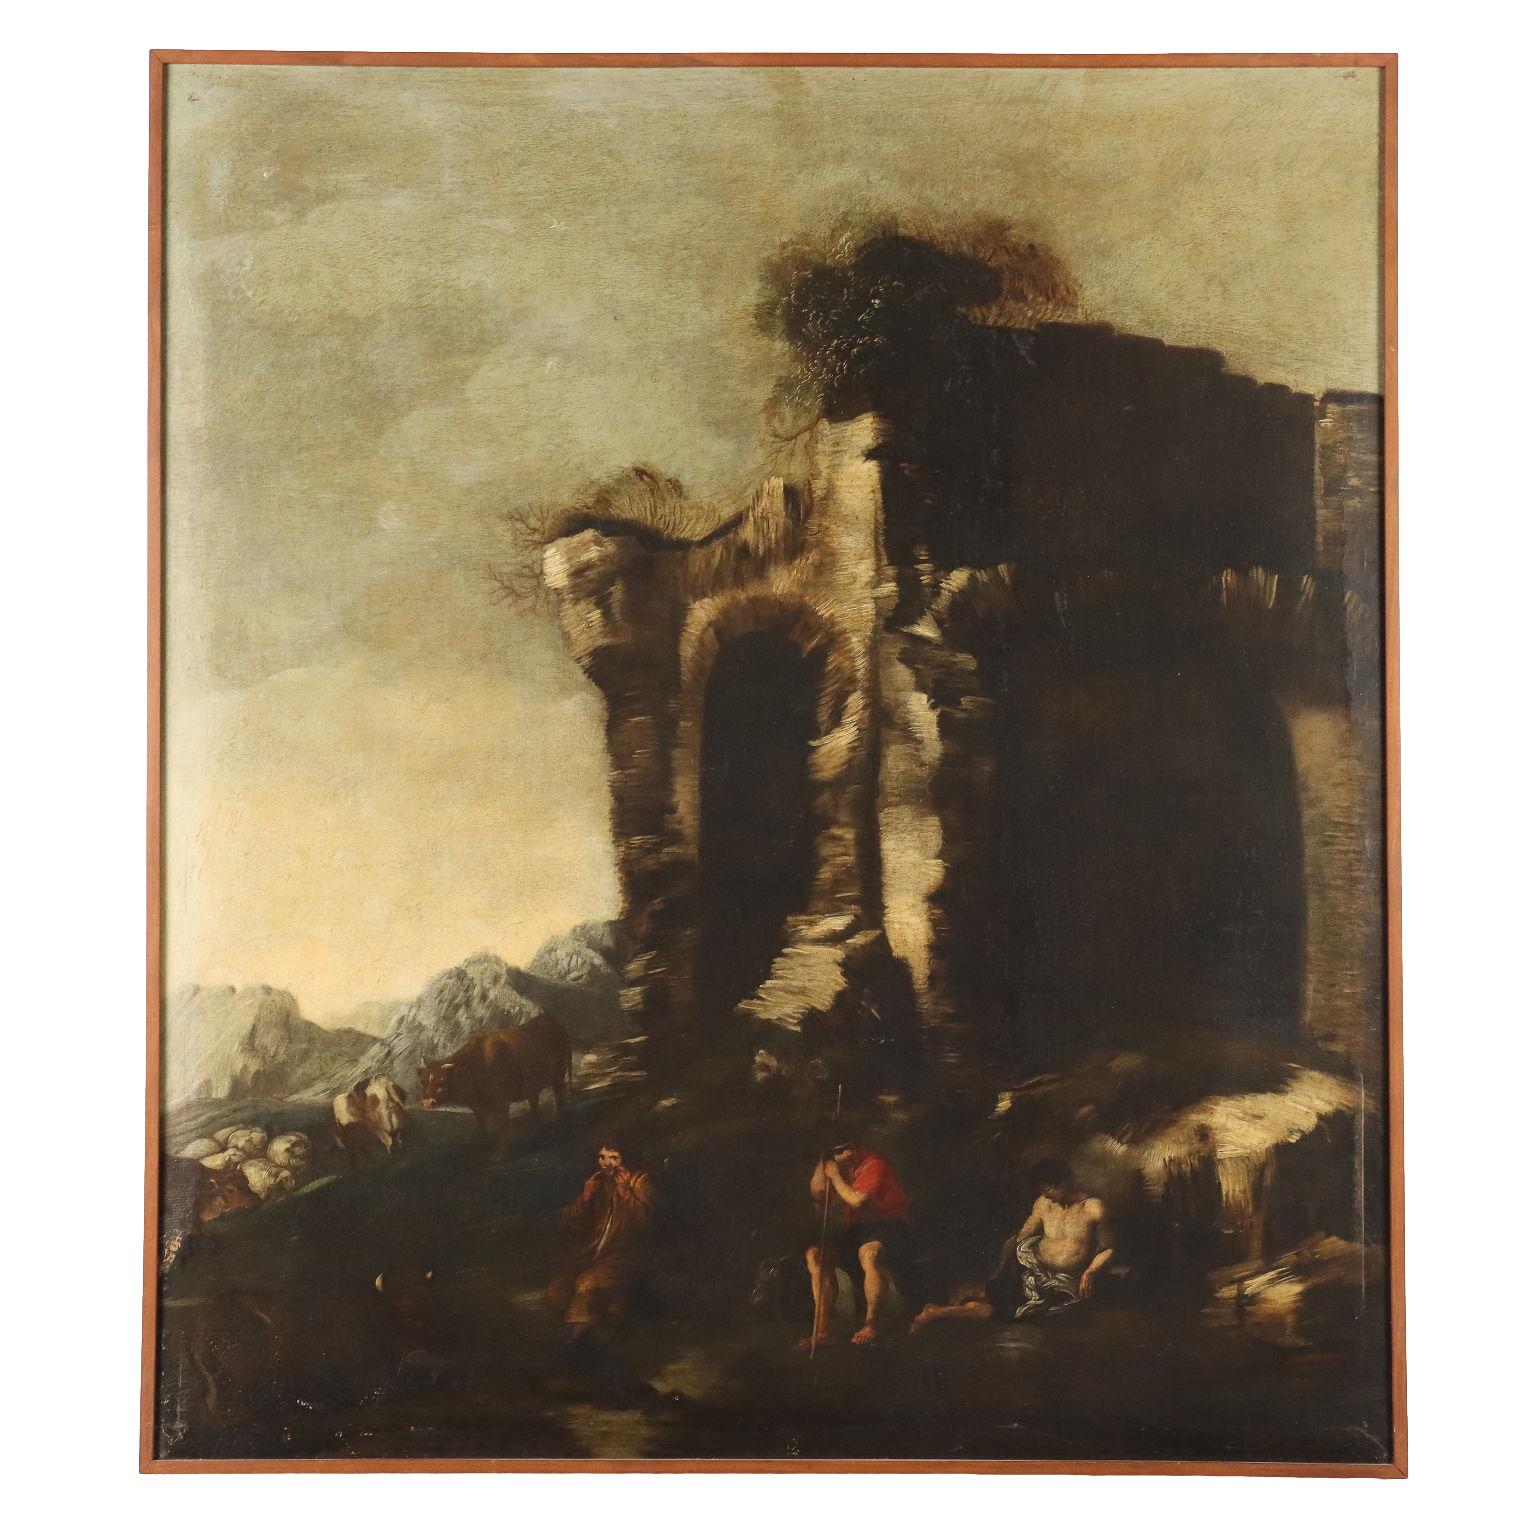 Unknown Landscape Painting - Painting Landscape with Ruins and Figures 18th century